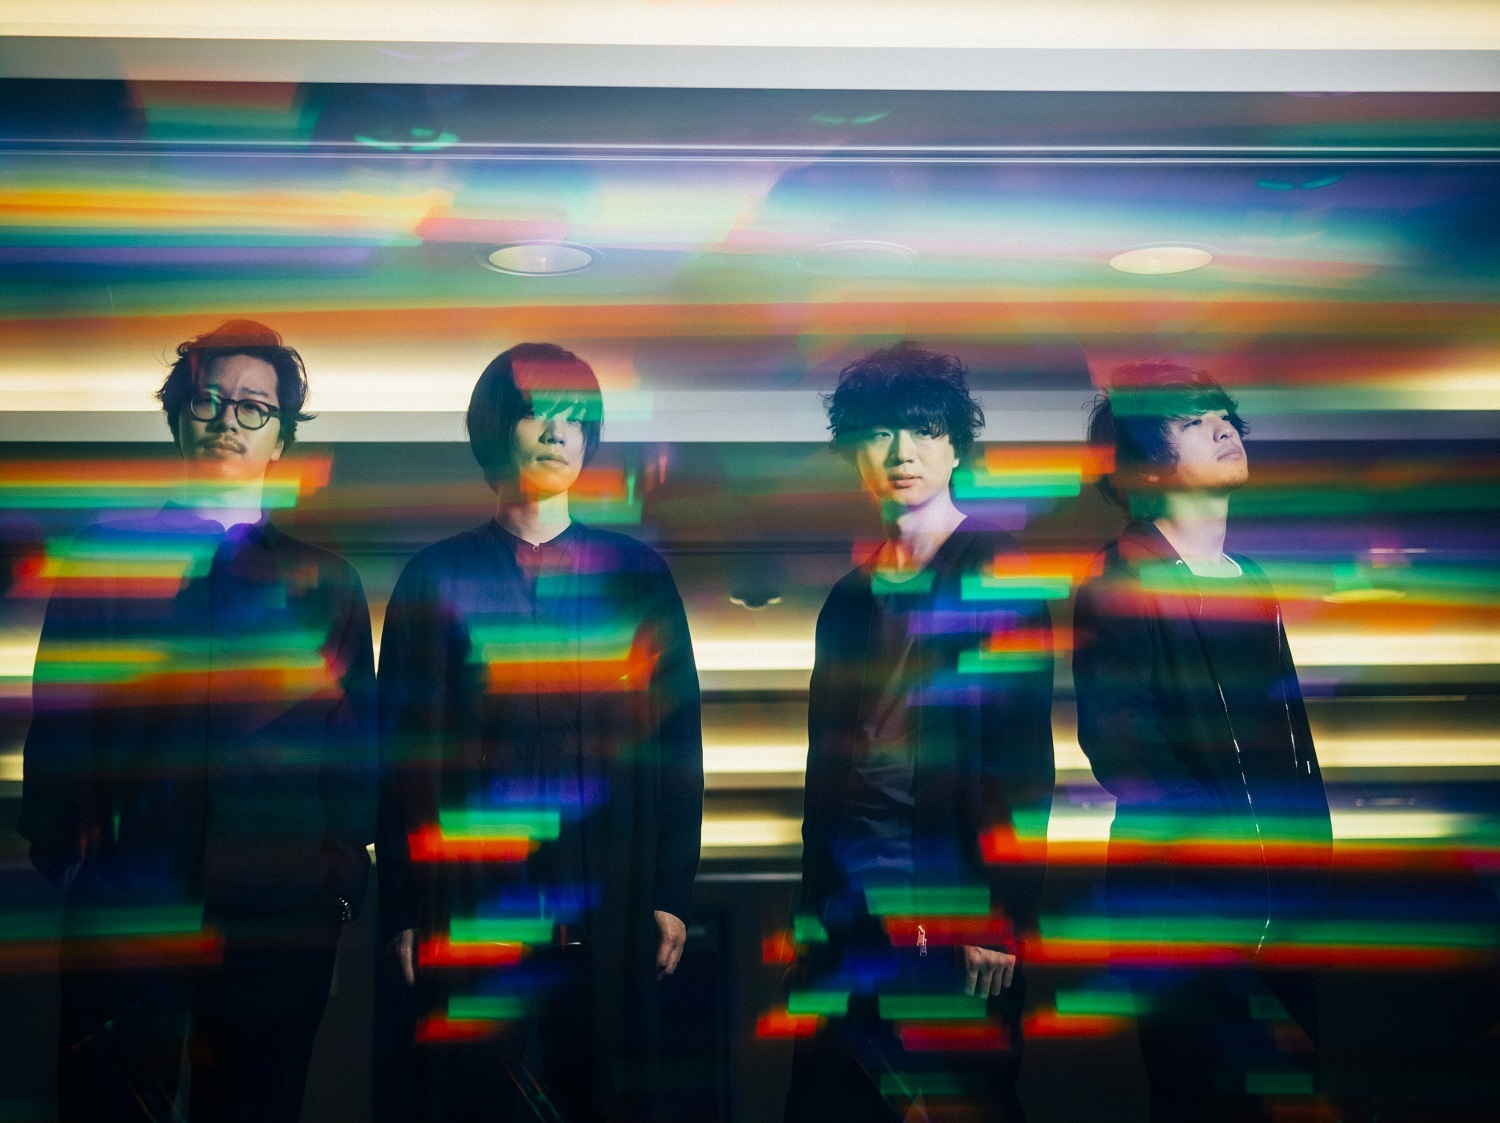 androp　撮影＝西槇太一